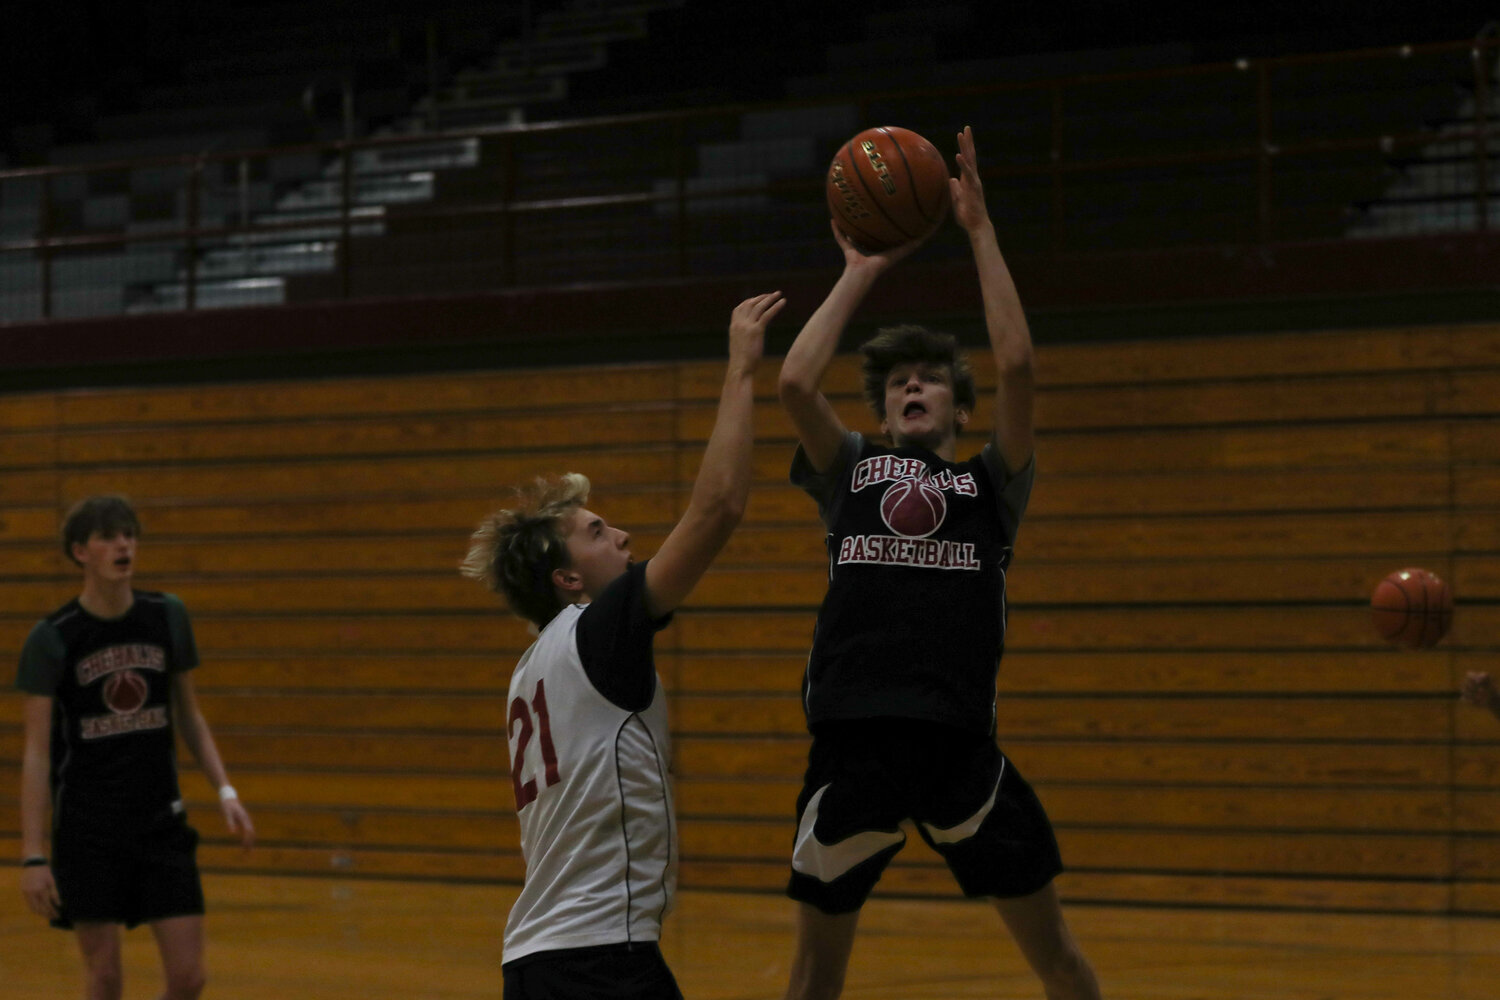 Trenton Schoepf shoots the ball over Weston Potter during W.F. West's practice on Nov. 21.